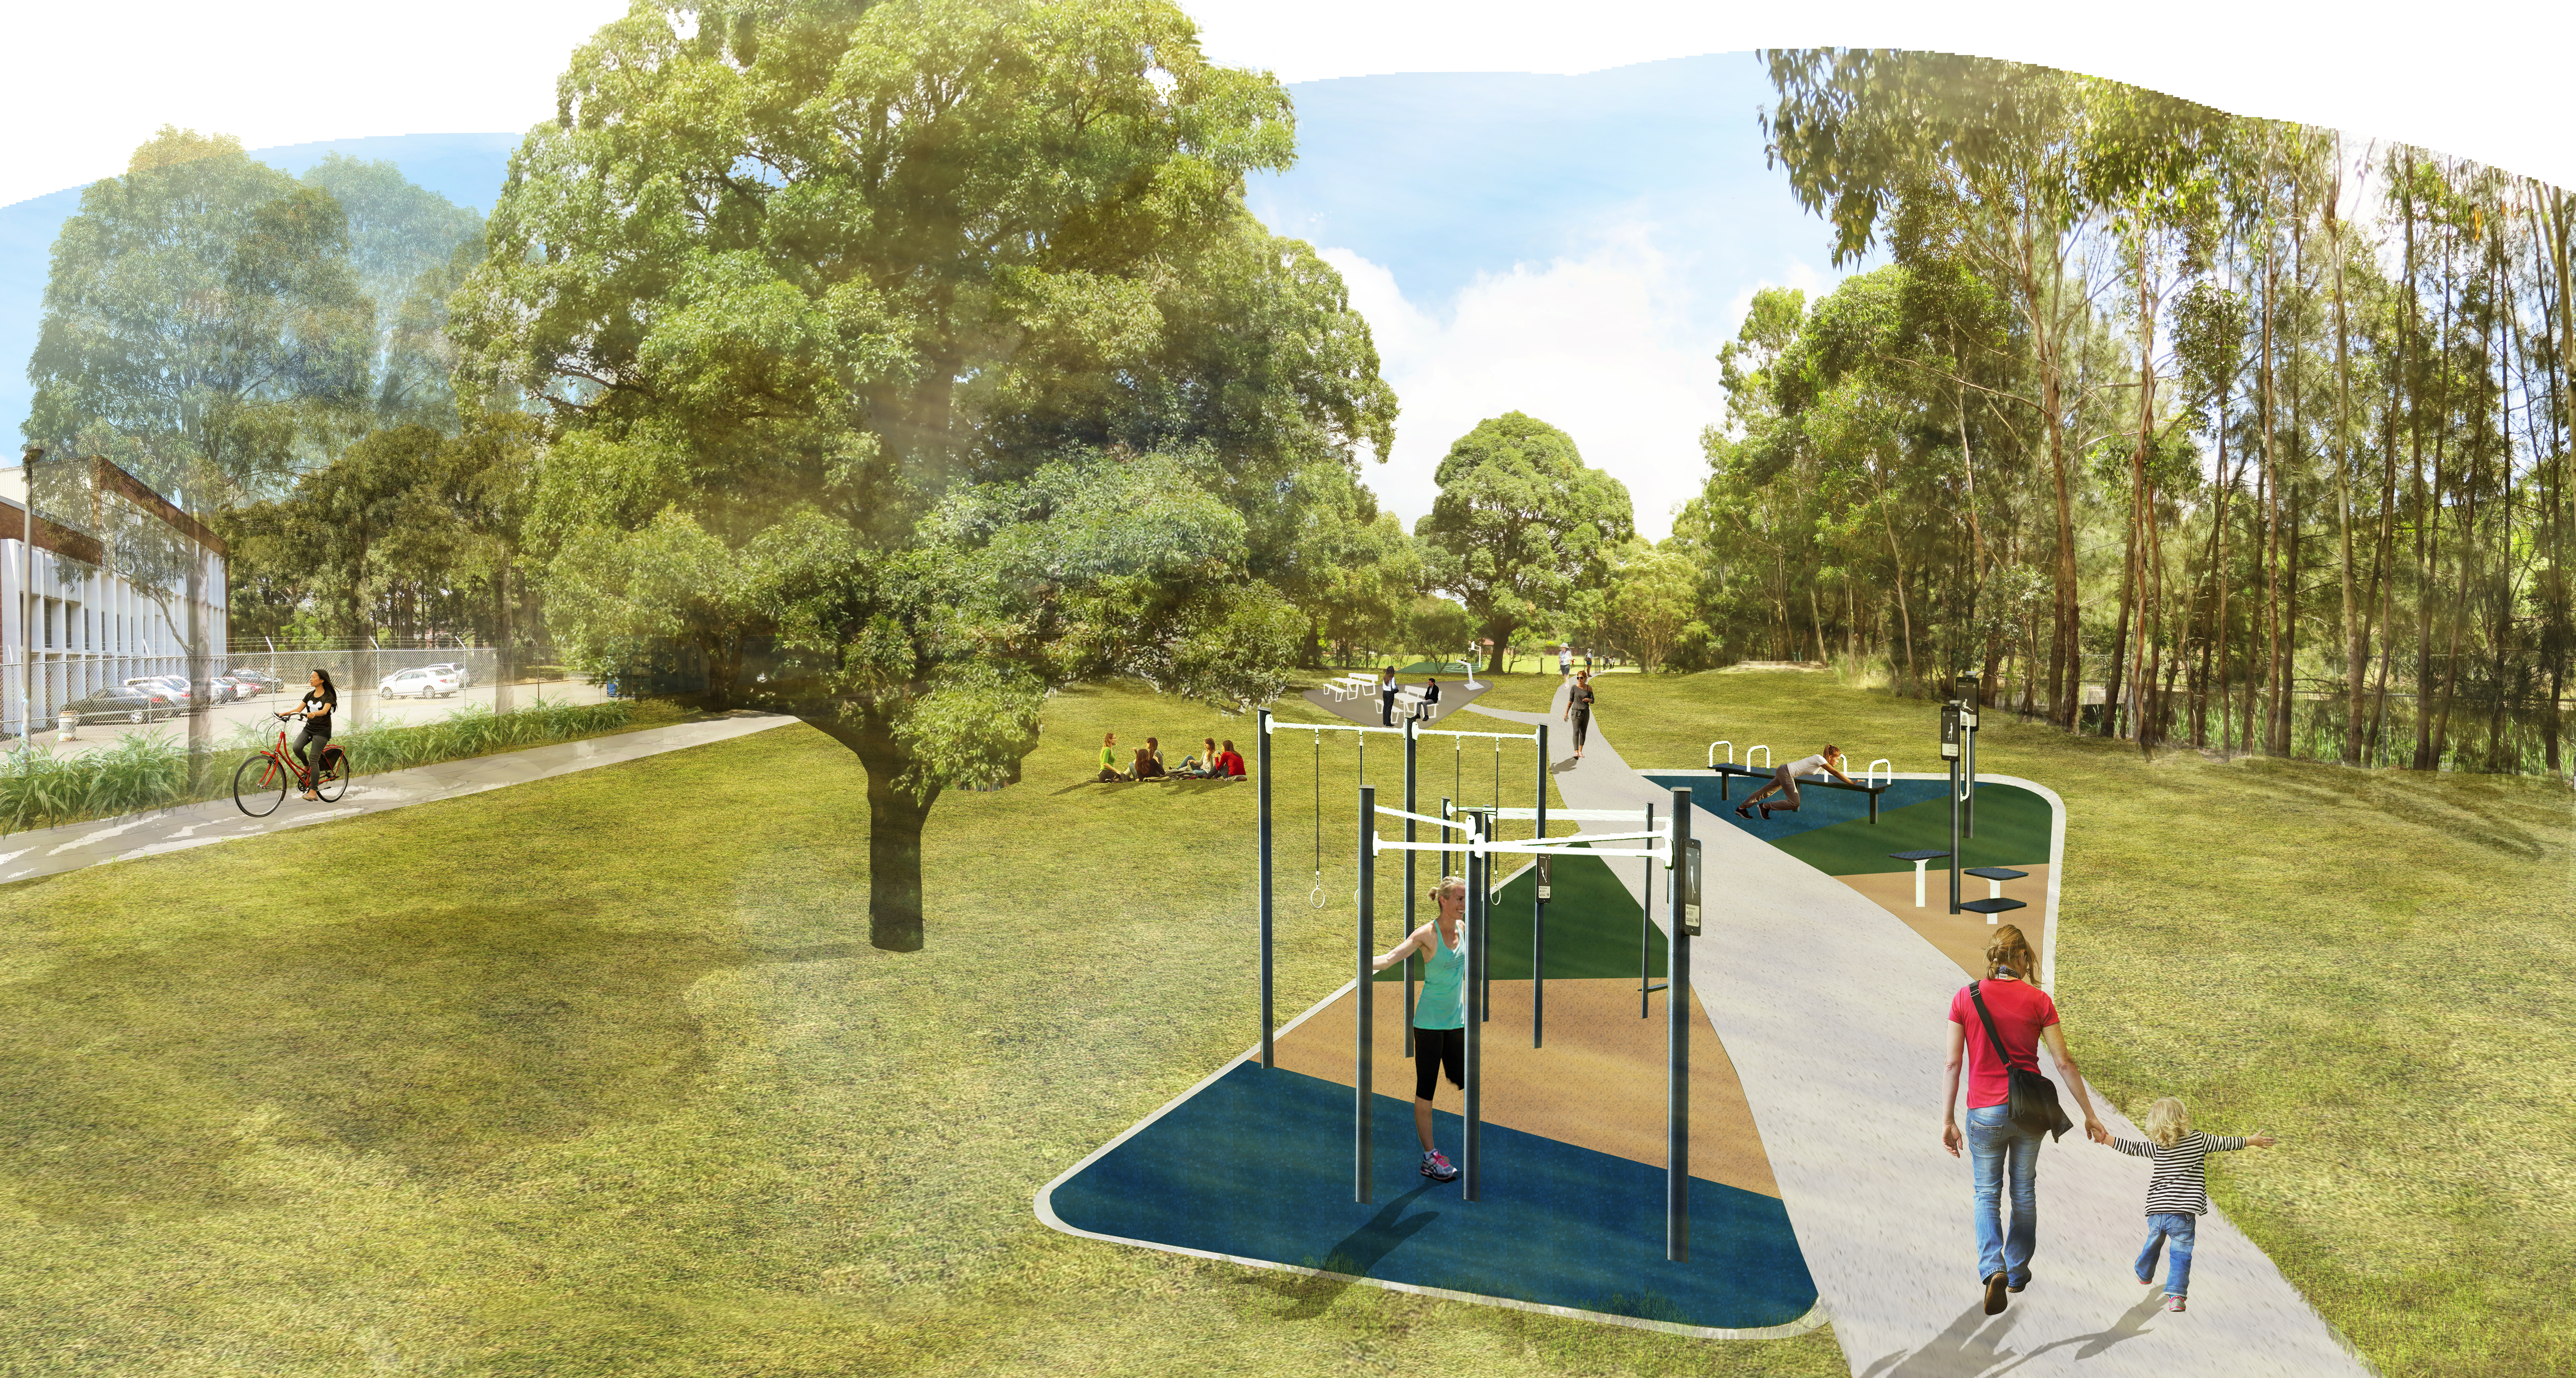 16. Basketball Courts, Seating, Bubblers And Fitness Equipment To Be Delivered At Tallawalla Reserve, Kingsgrove